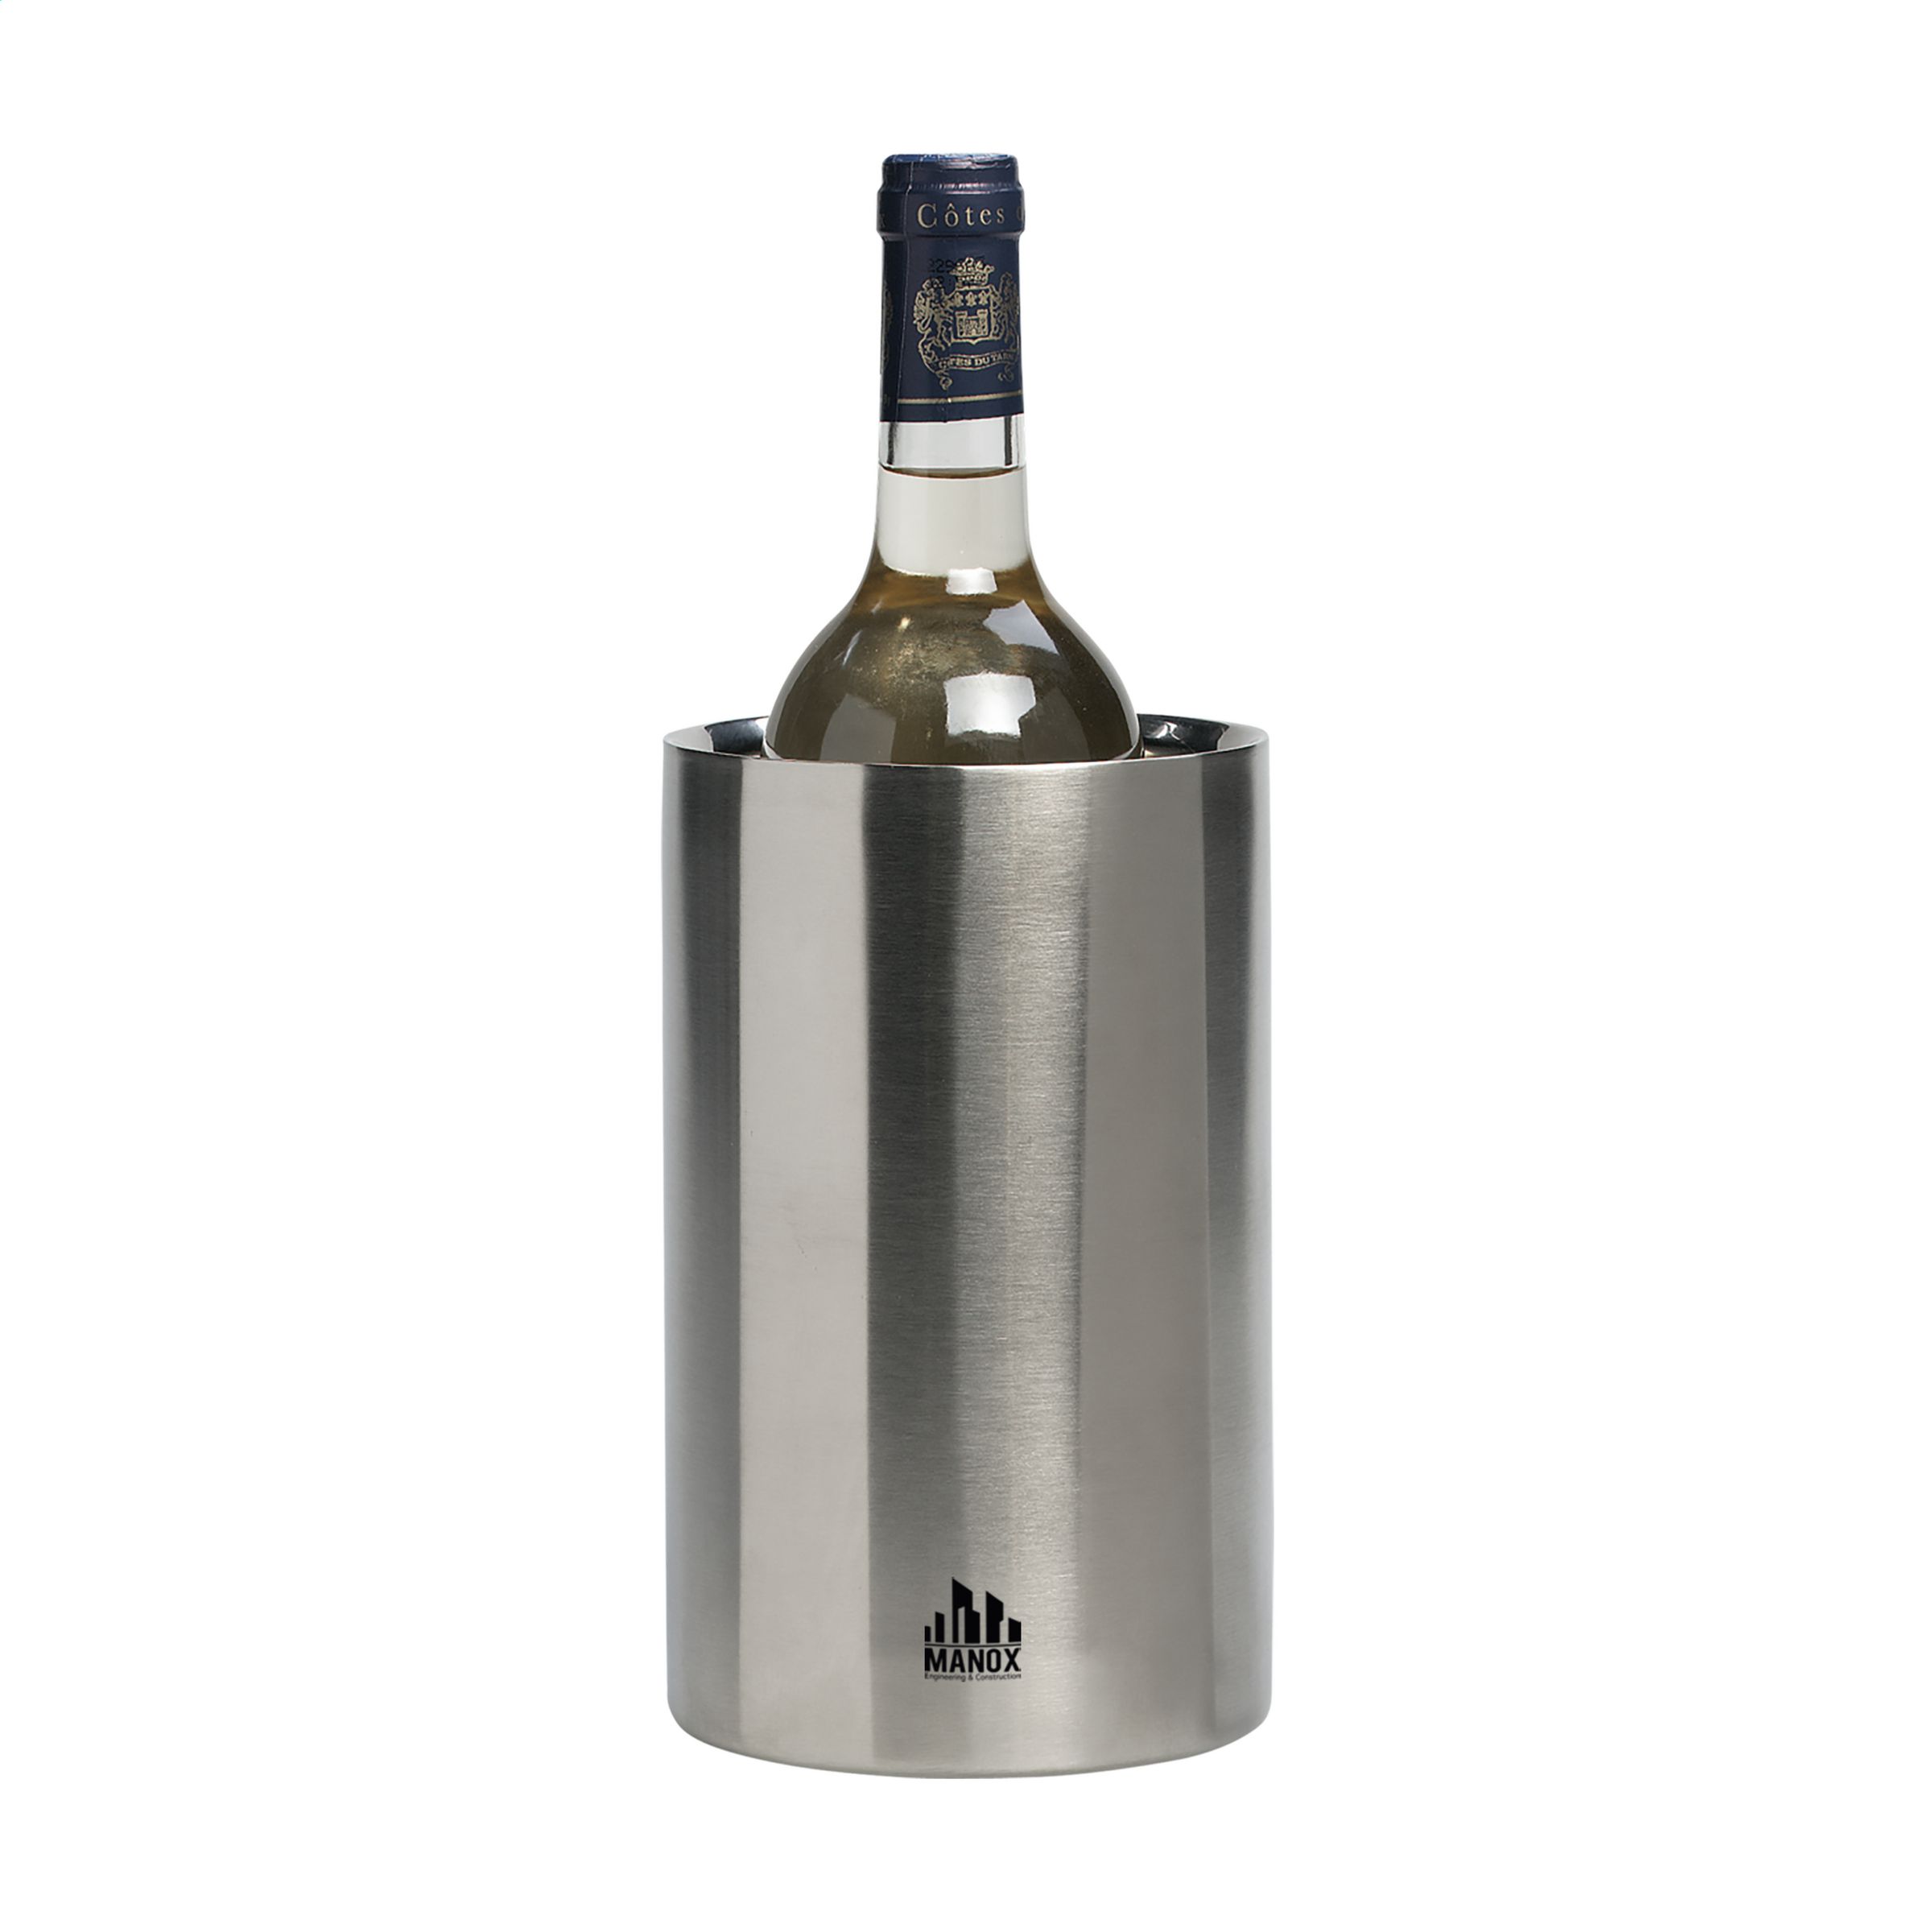 Stainless Steel Double-Walled Wine Cooler - Rowlands Castle